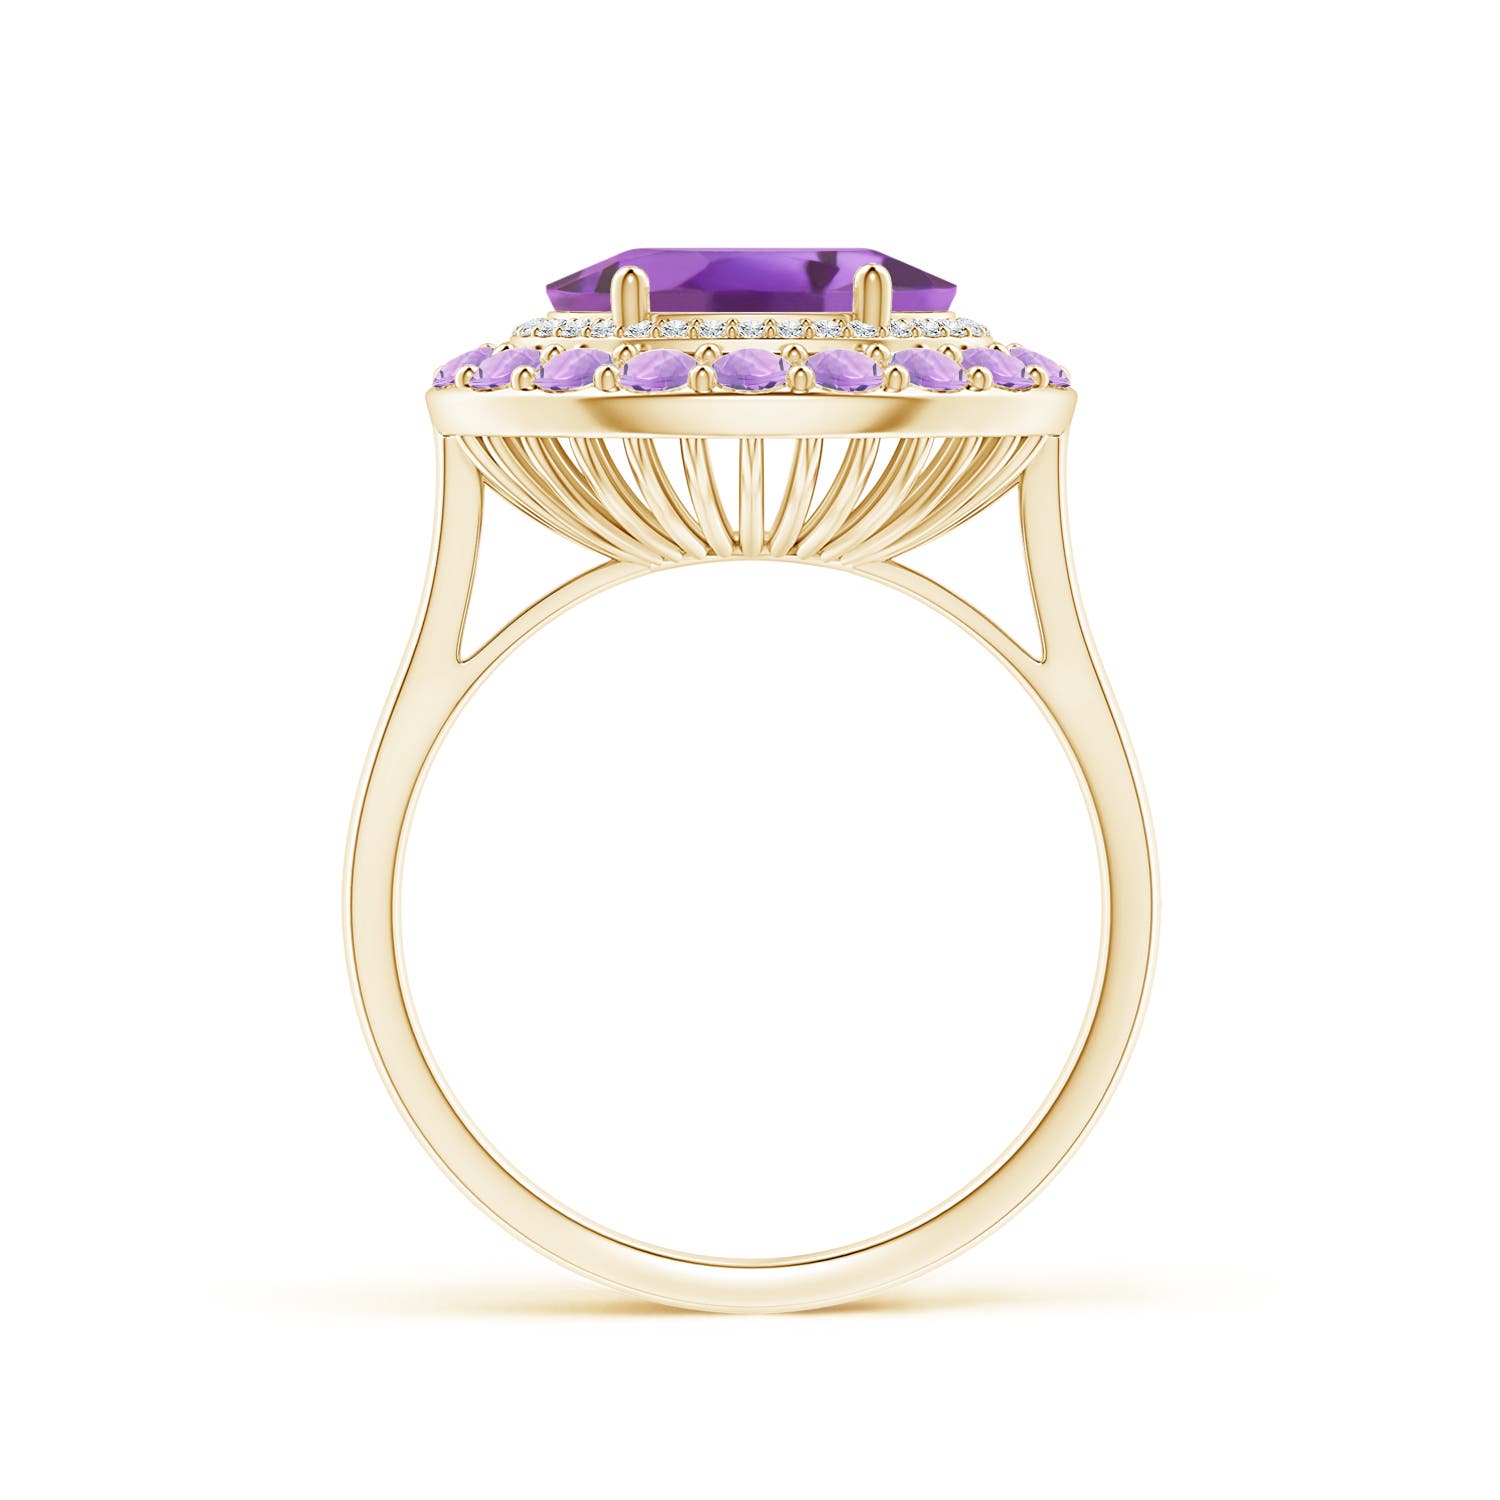 A - Amethyst / 2.93 CT / 14 KT Yellow Gold